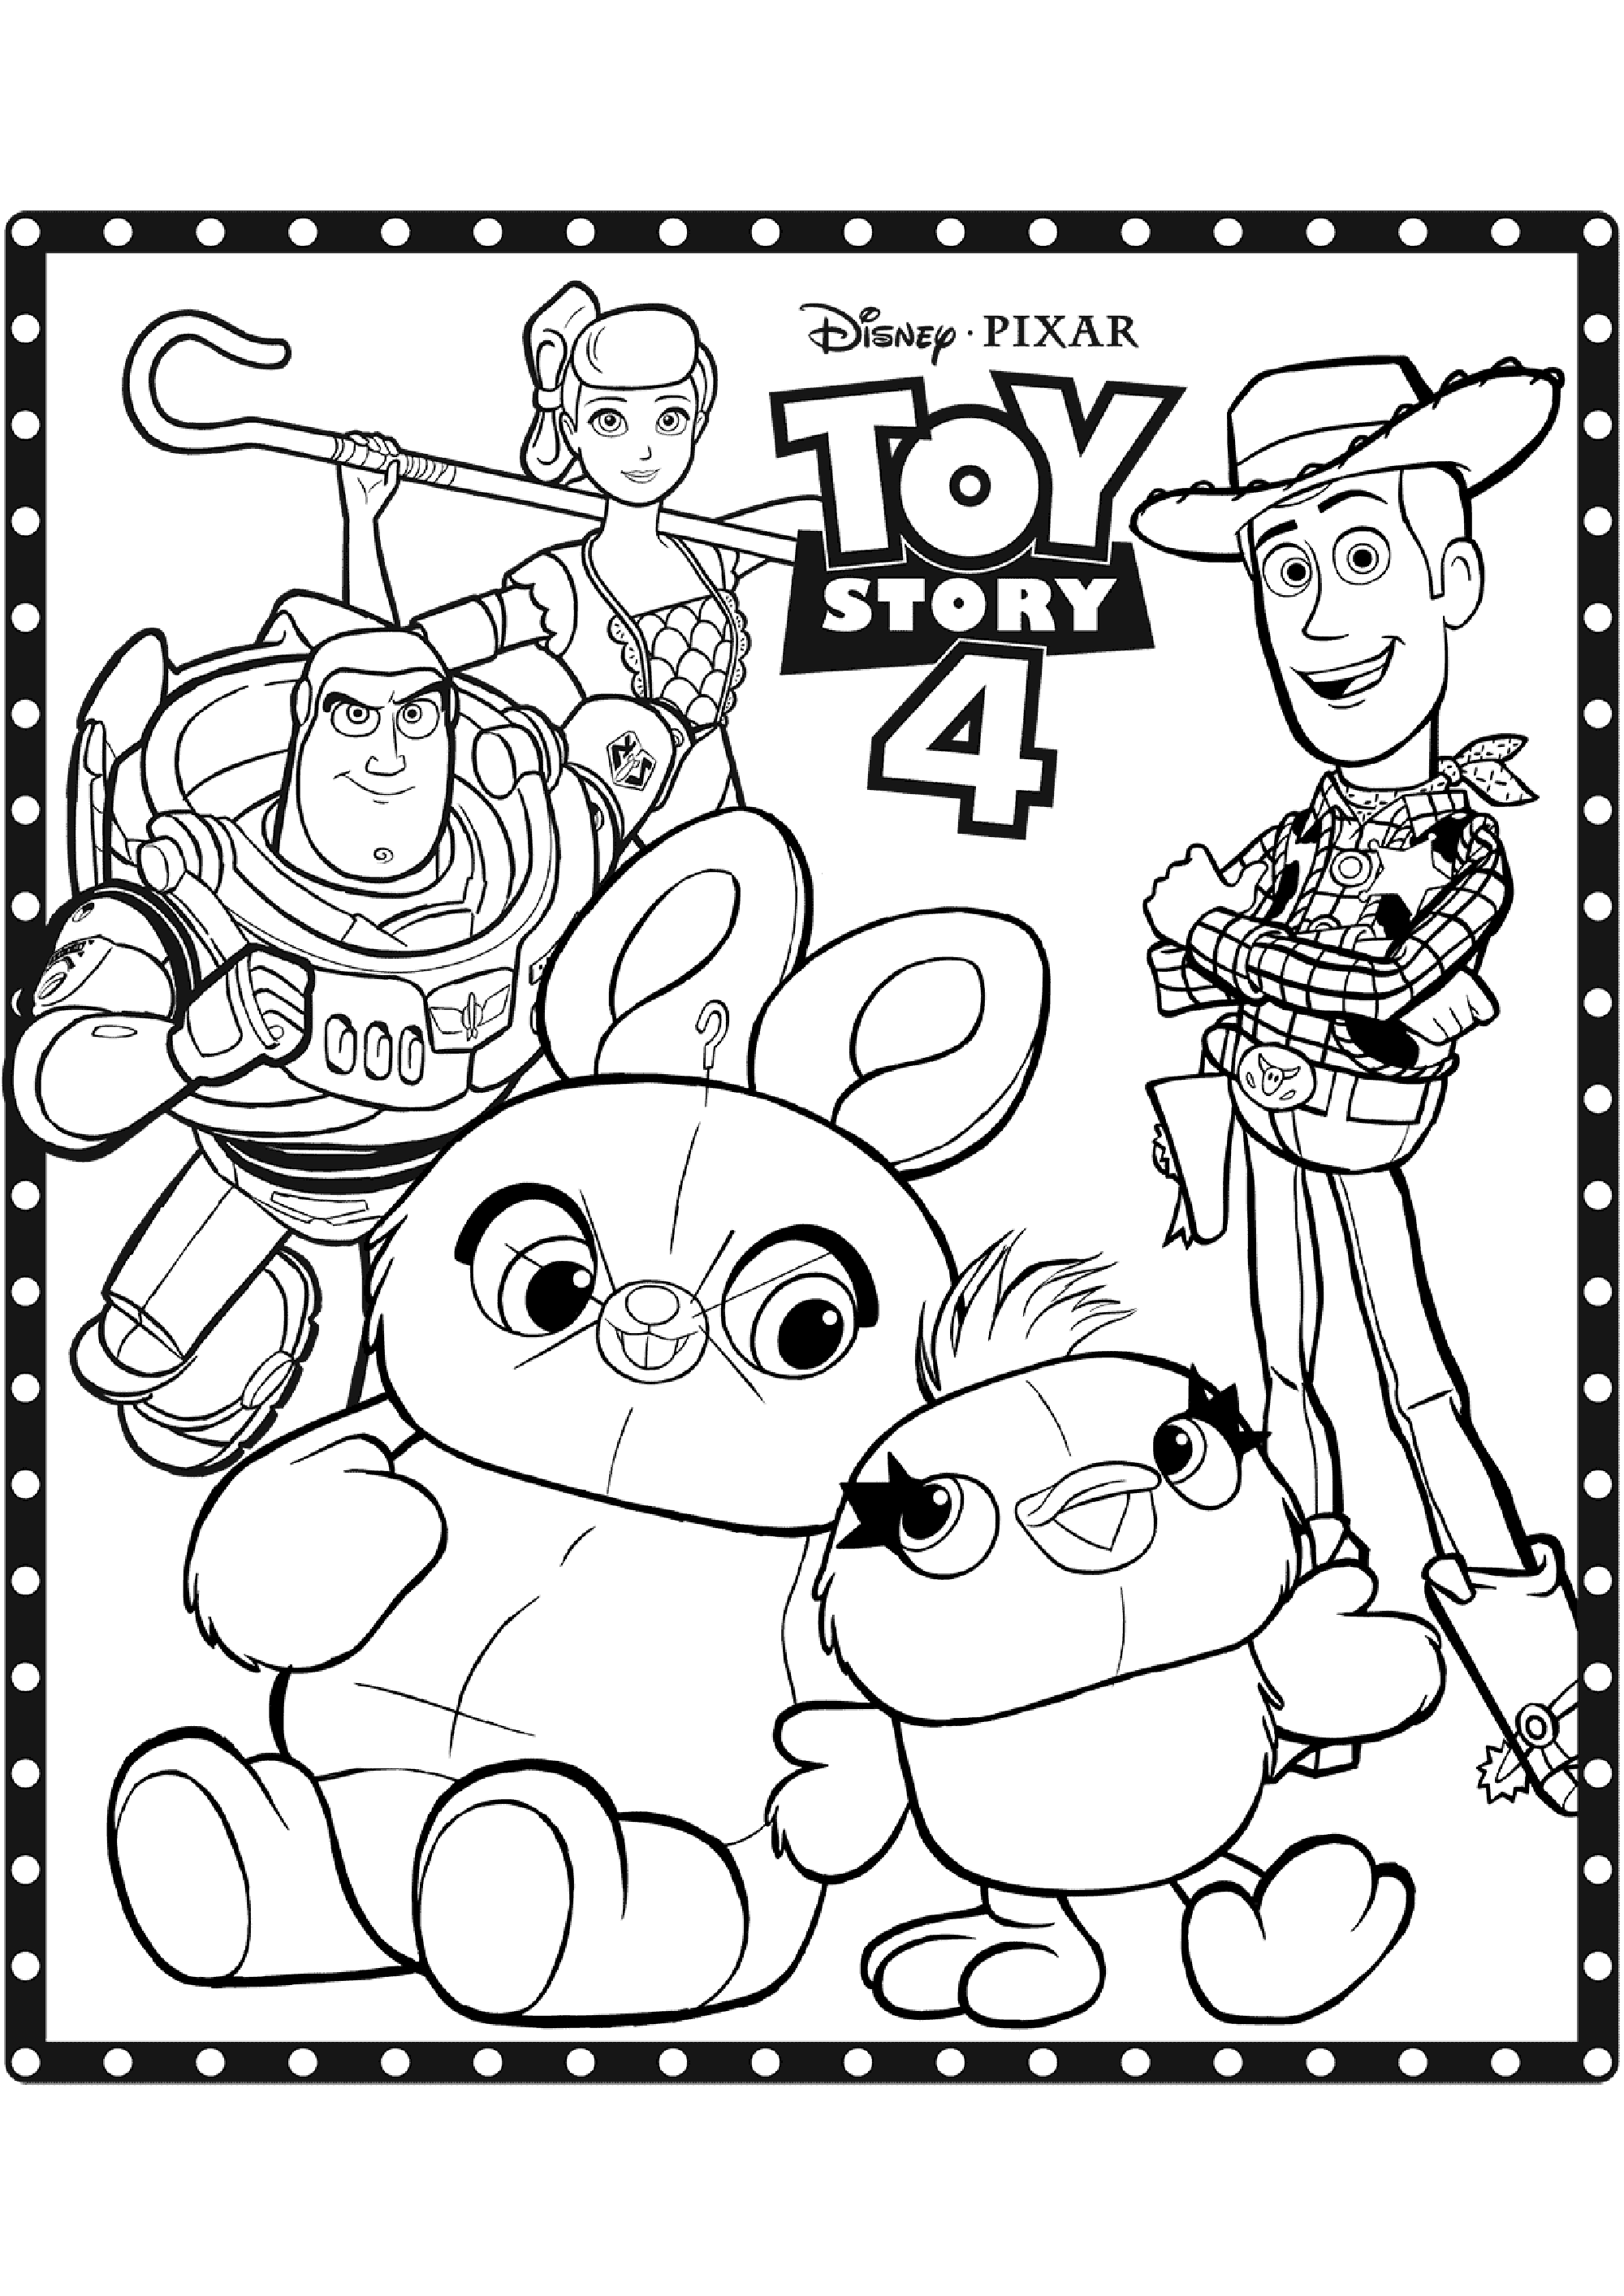 toy-story-4-coloring-page-disney-pixar-all-the-characters-toy